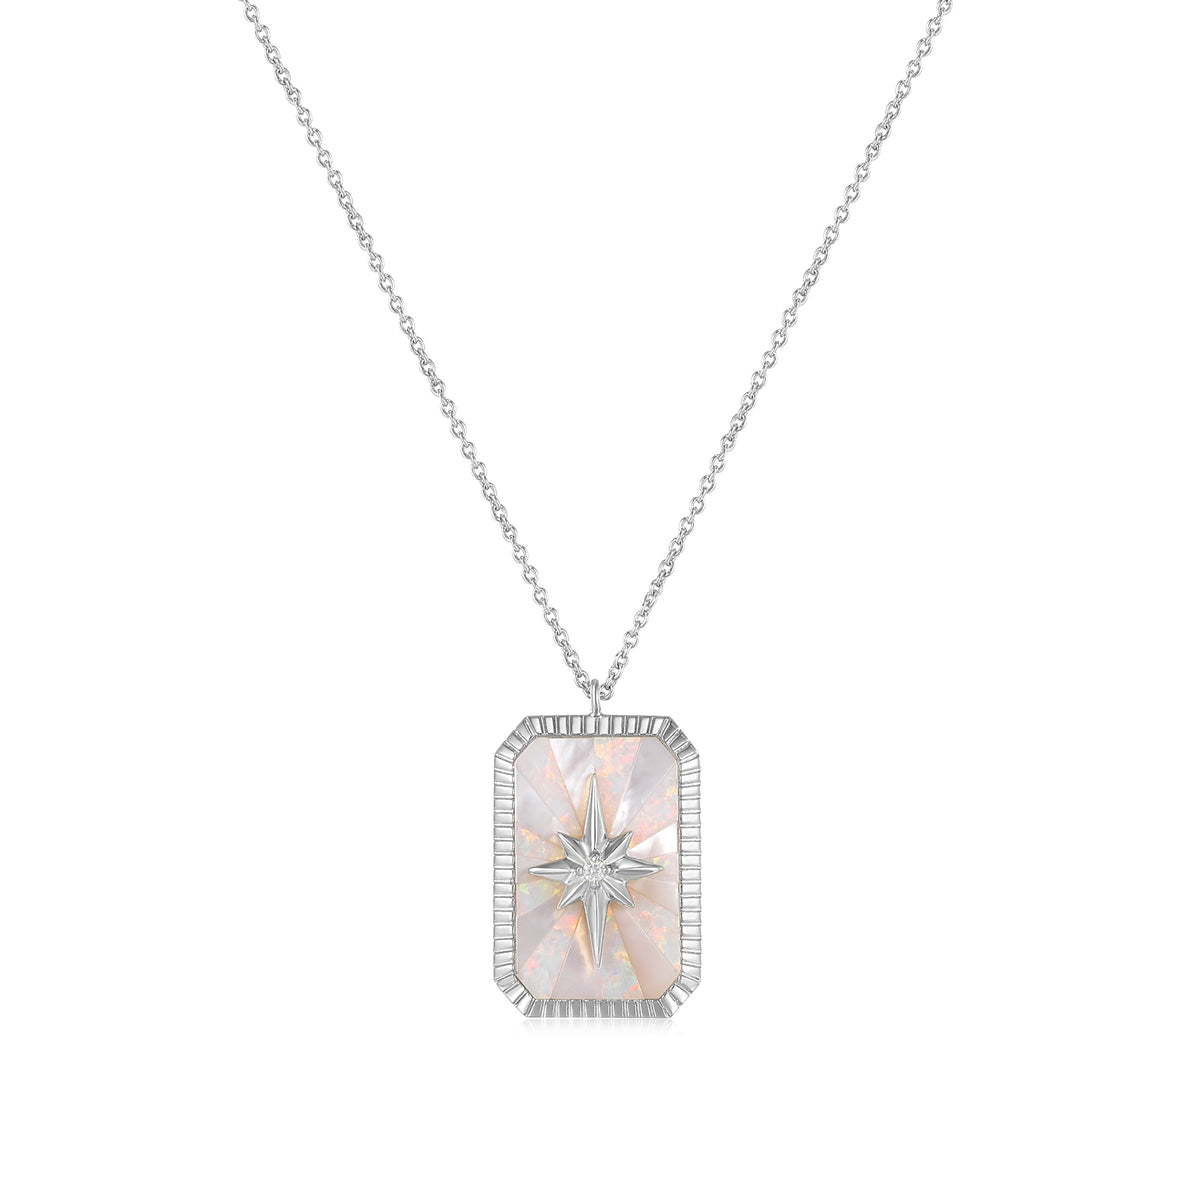 Lucina | Grewia Necklace | White CZ / Opal / White Mother of Pearl | Rhodium Plated Brass